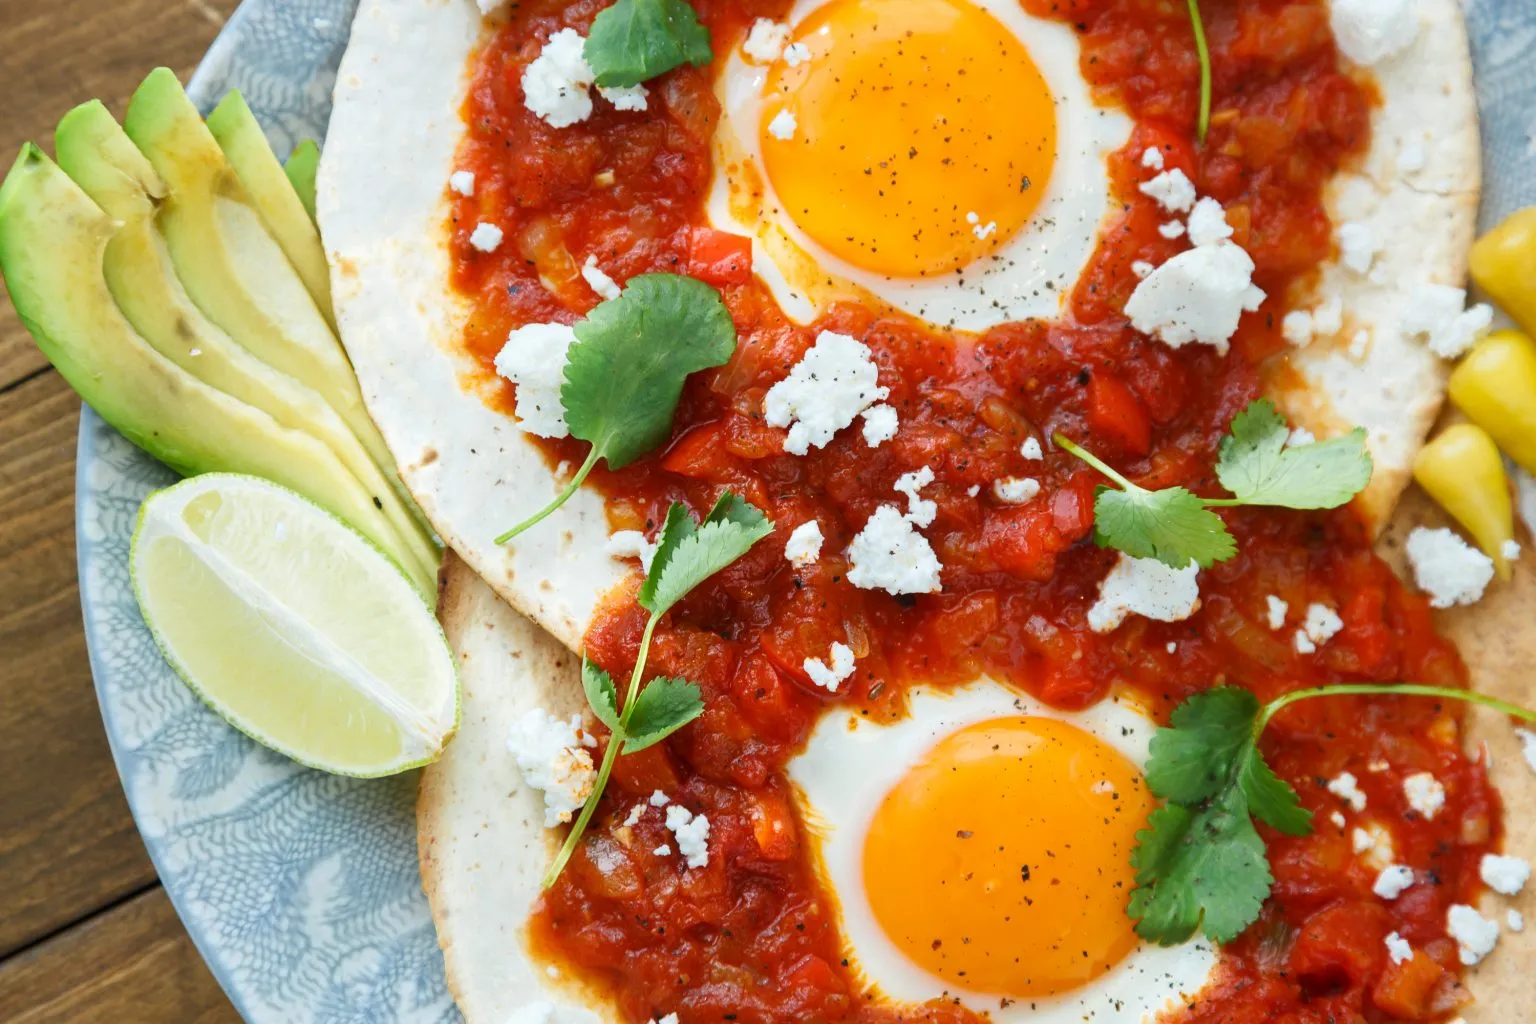 Mexican Breakfast Guide: How to Enjoy Breakfast in Mexico